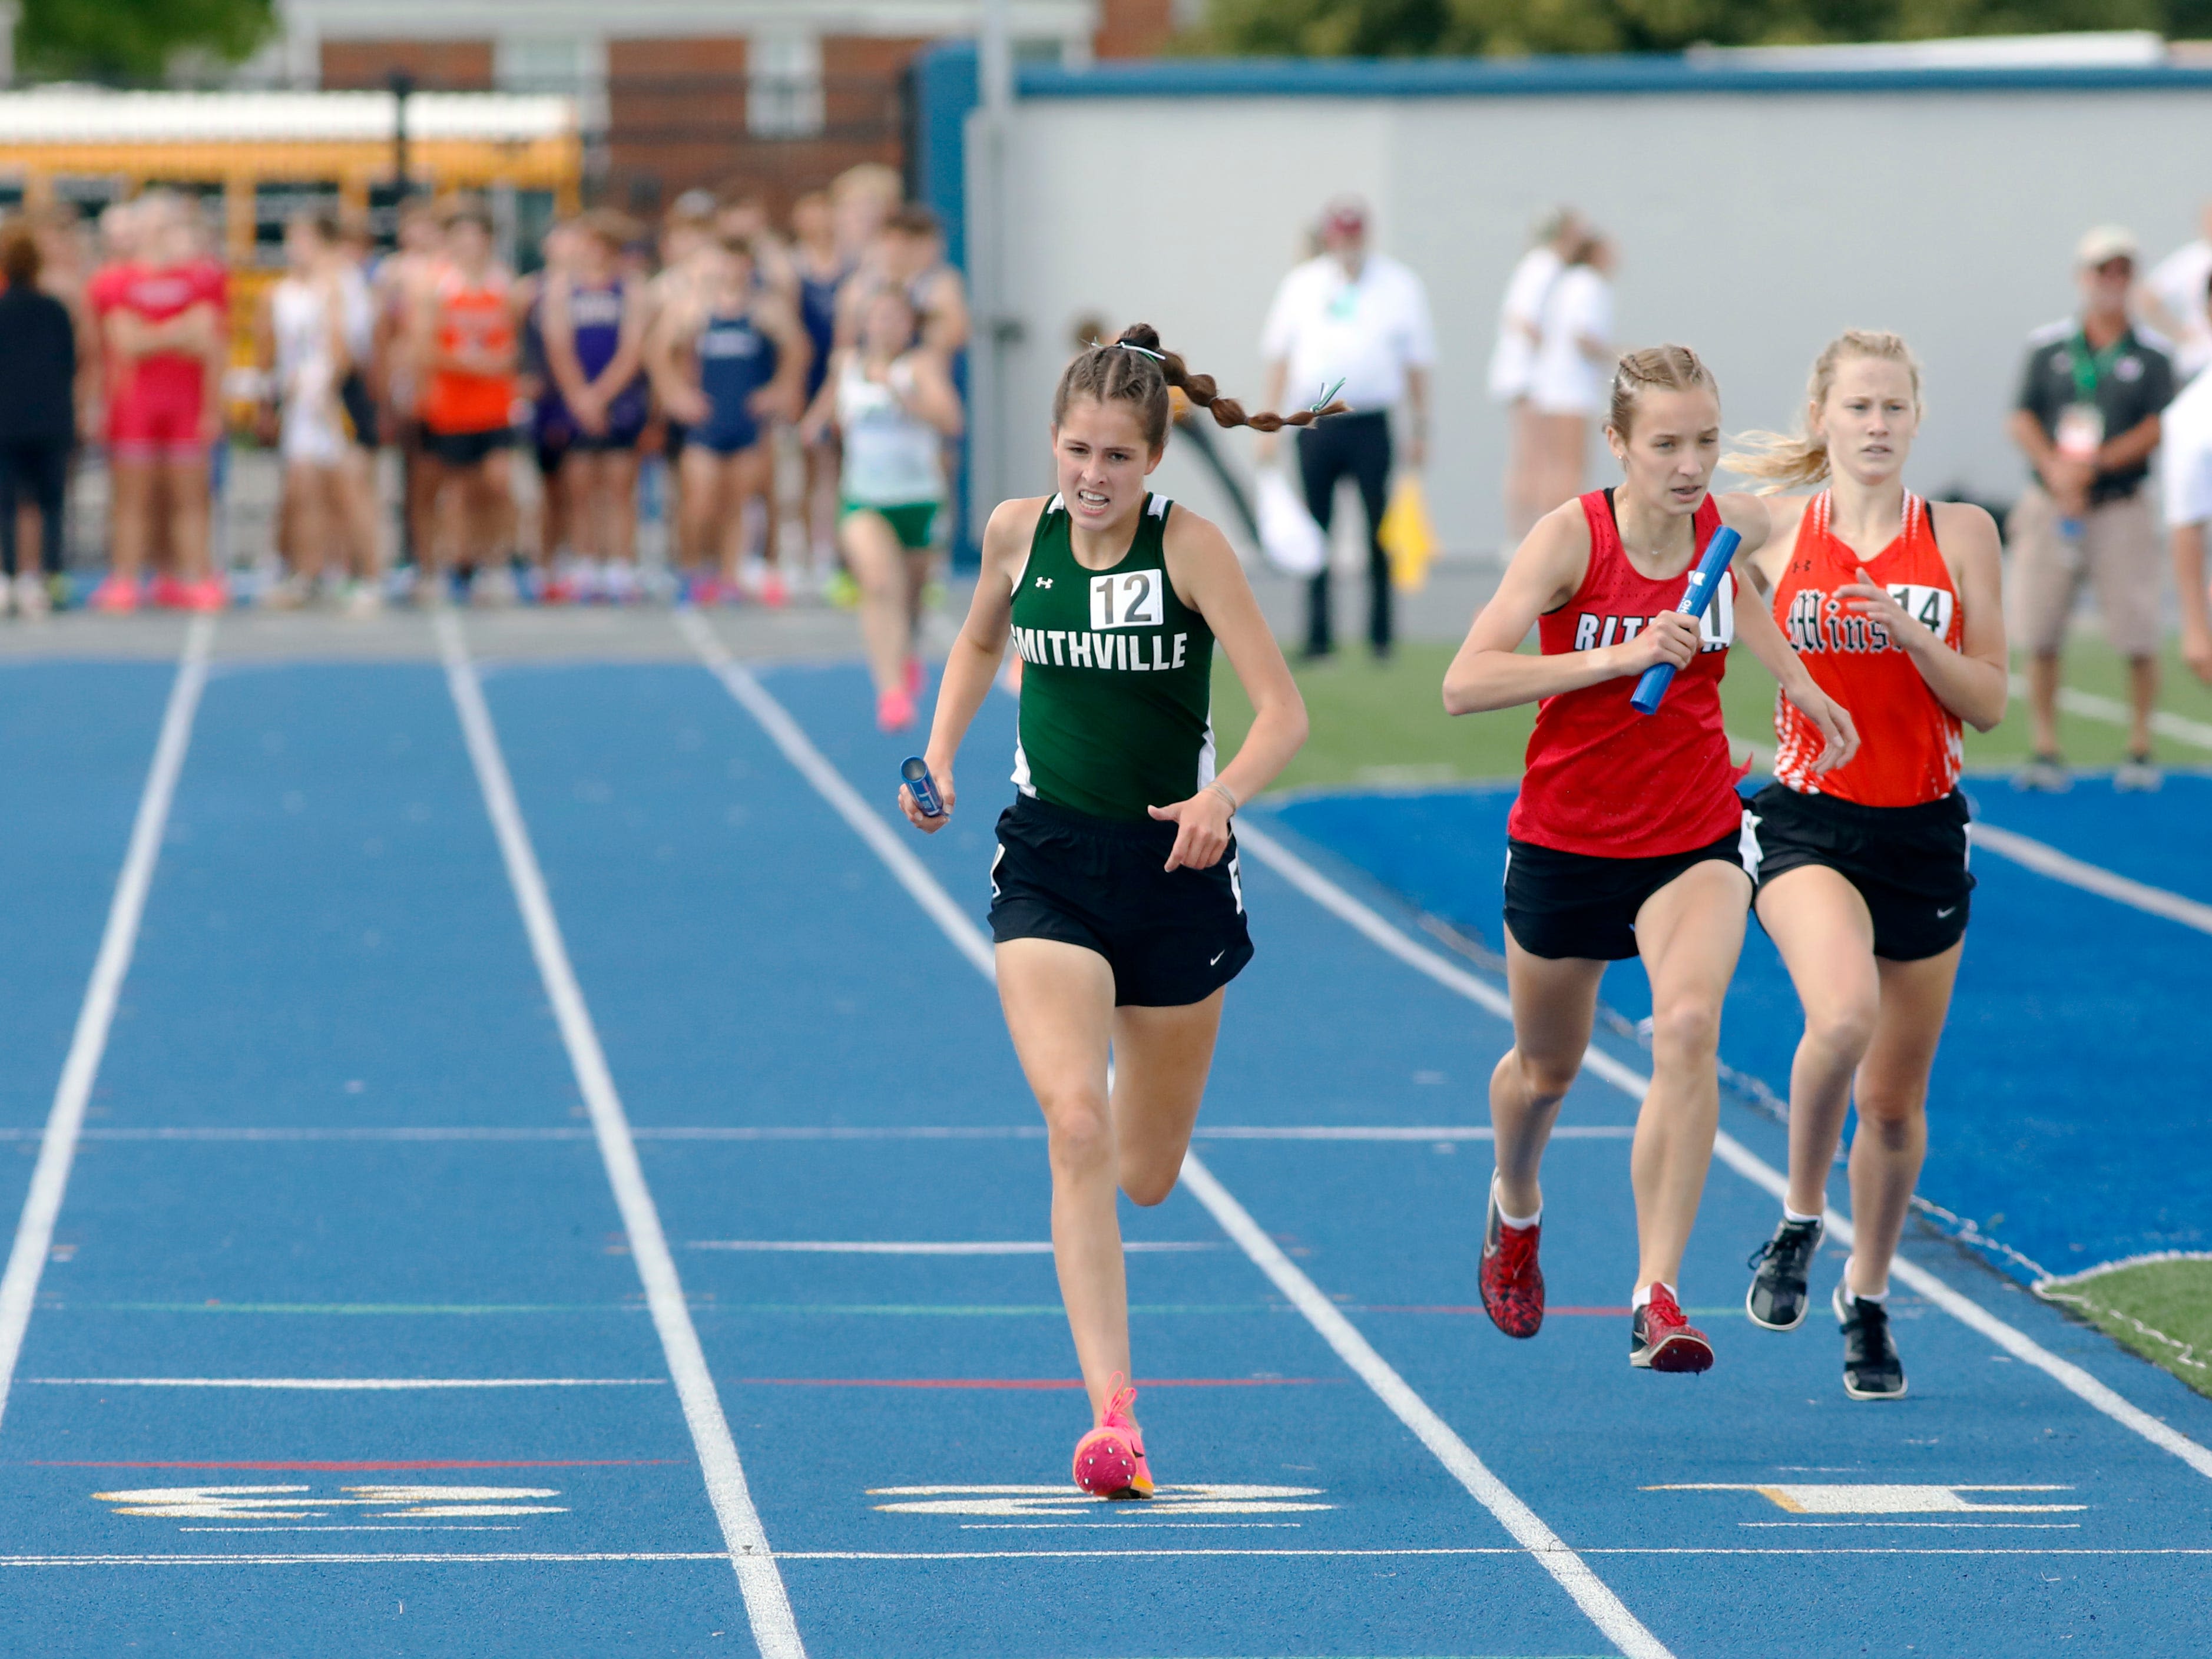 'Just cross the finish line first': Smithville outraces Rittman in dramatic 4x800 relay